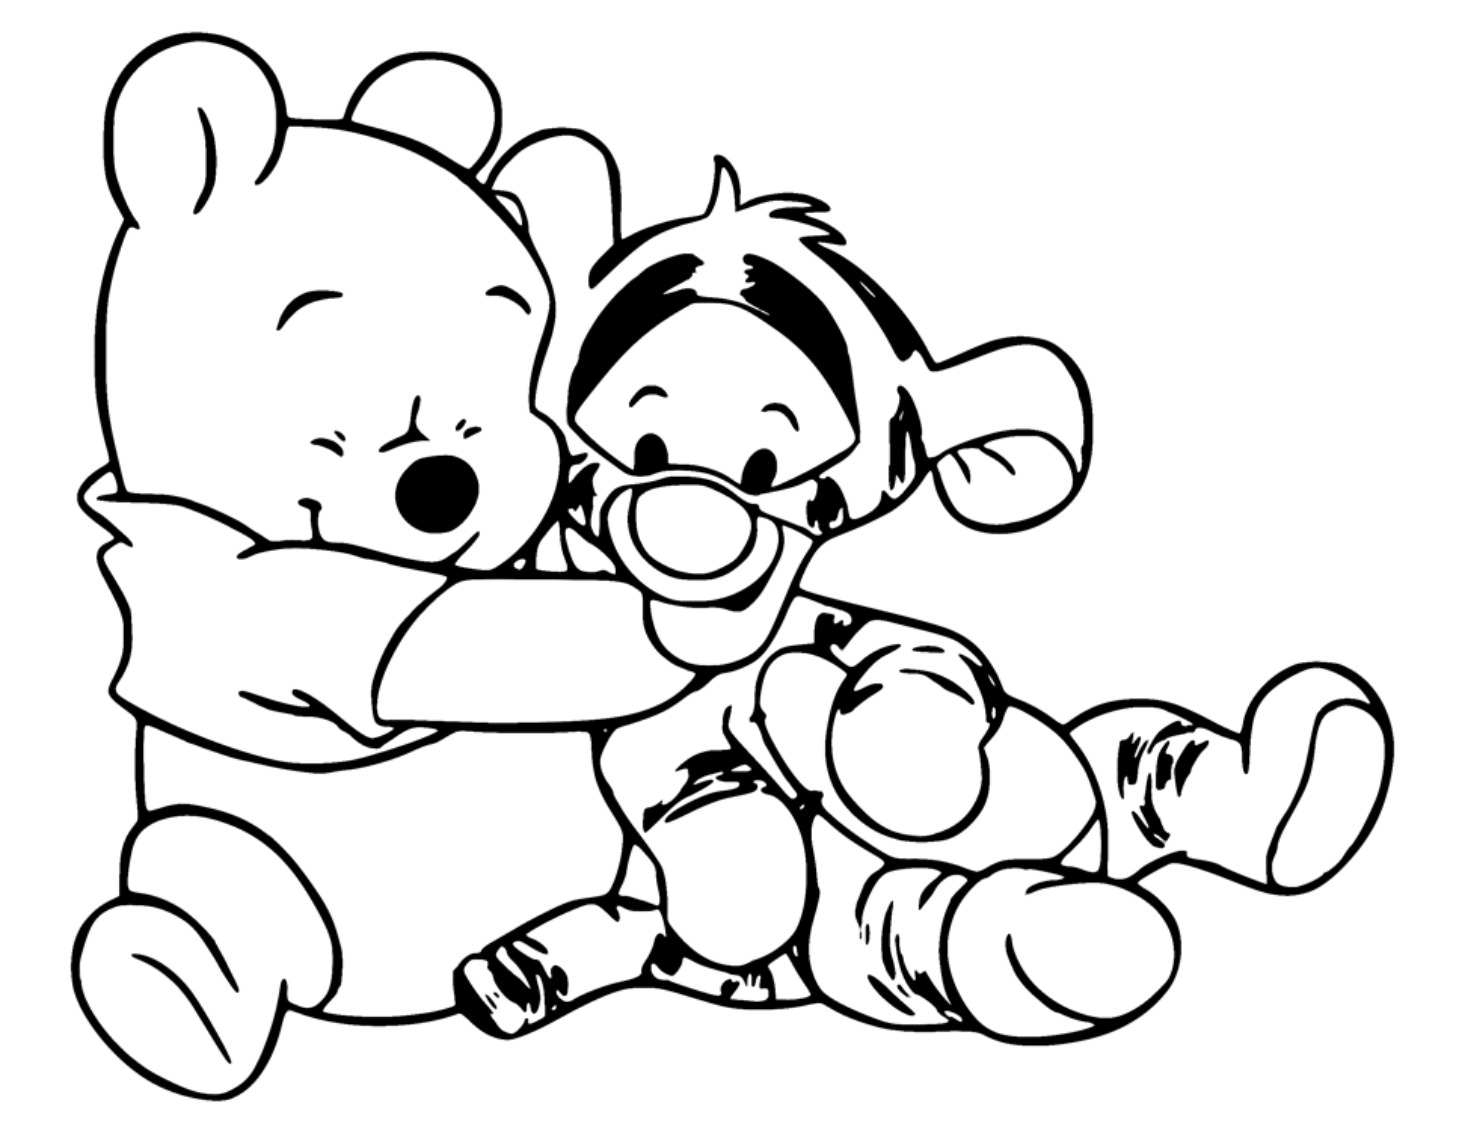 Printable Winnie the Pooh and Tigger Coloring Page for kids.